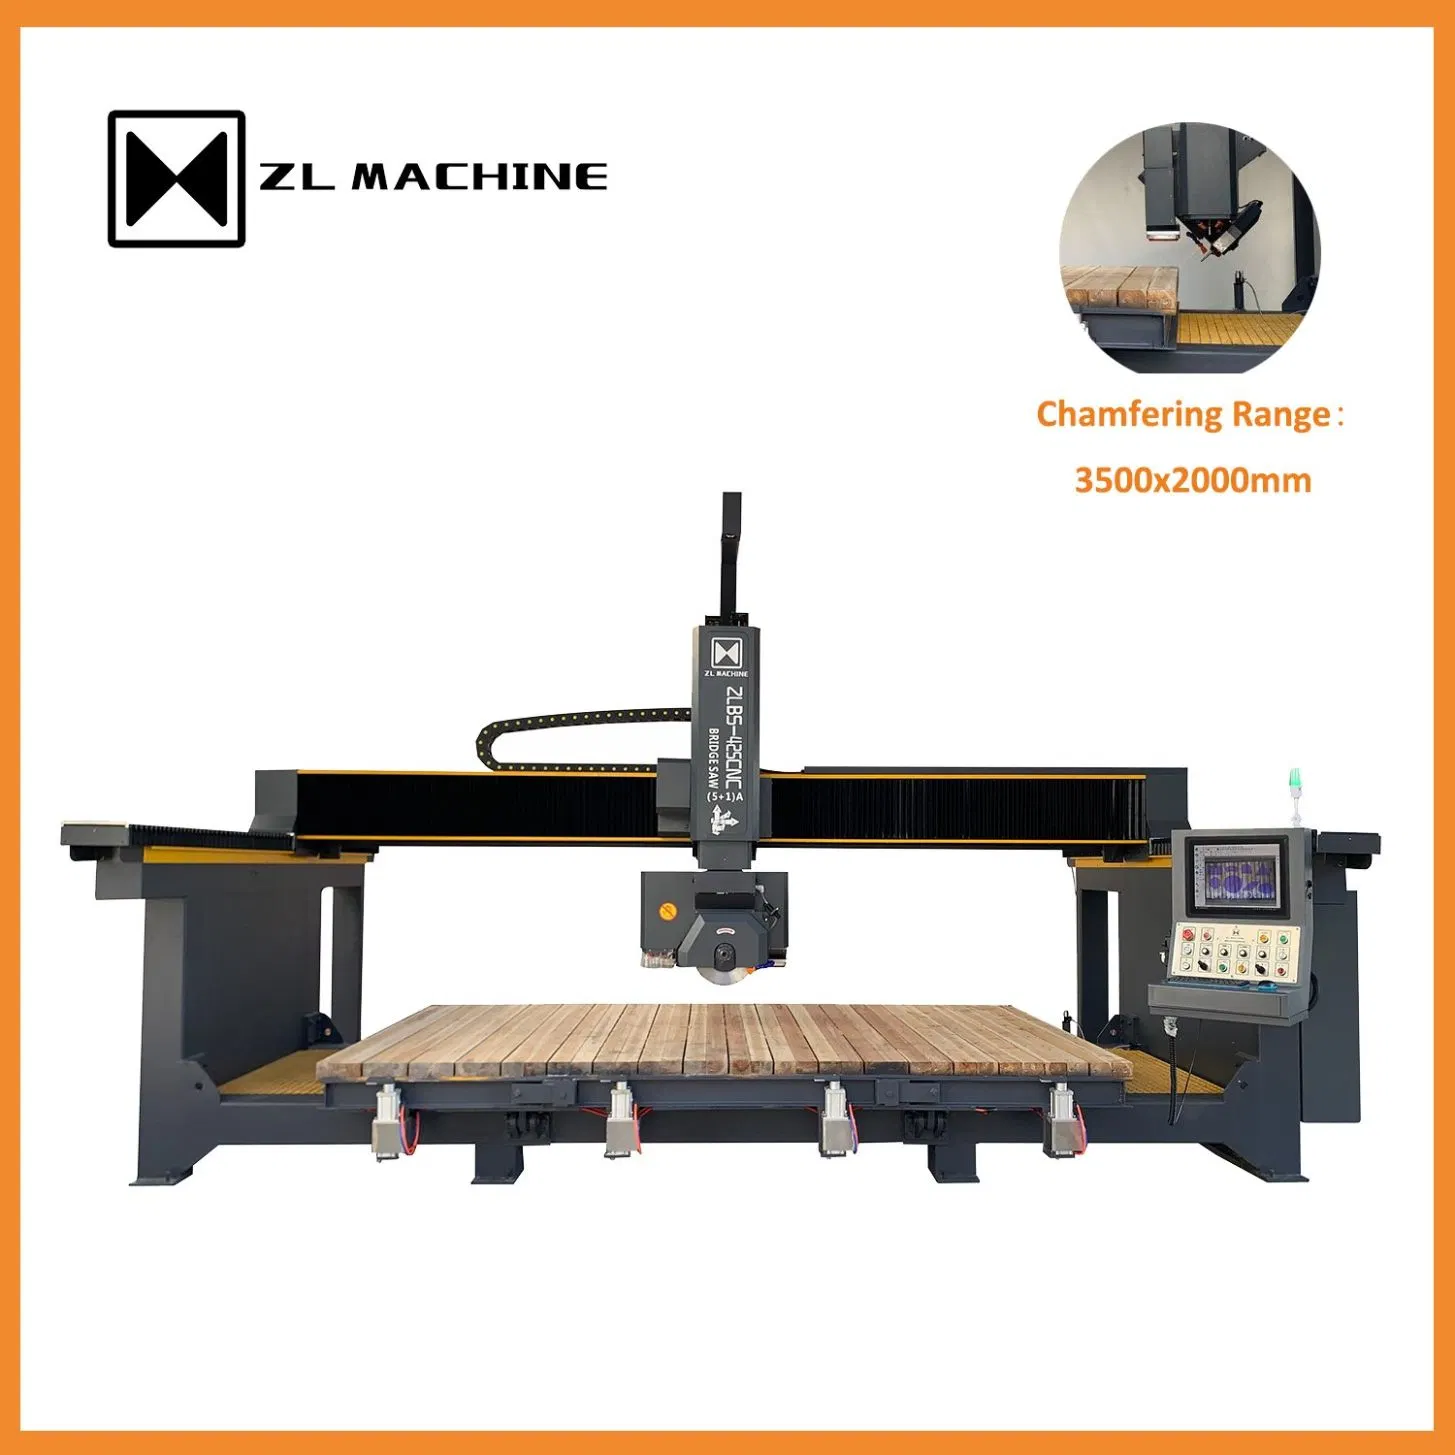 Automatic 5-Axis CNC Stone Cutting Machine Bridge Saw for Milling Marble Granite Quartz Slab Countertop Cutter Drilling Profiling Processing Machinery for Sale